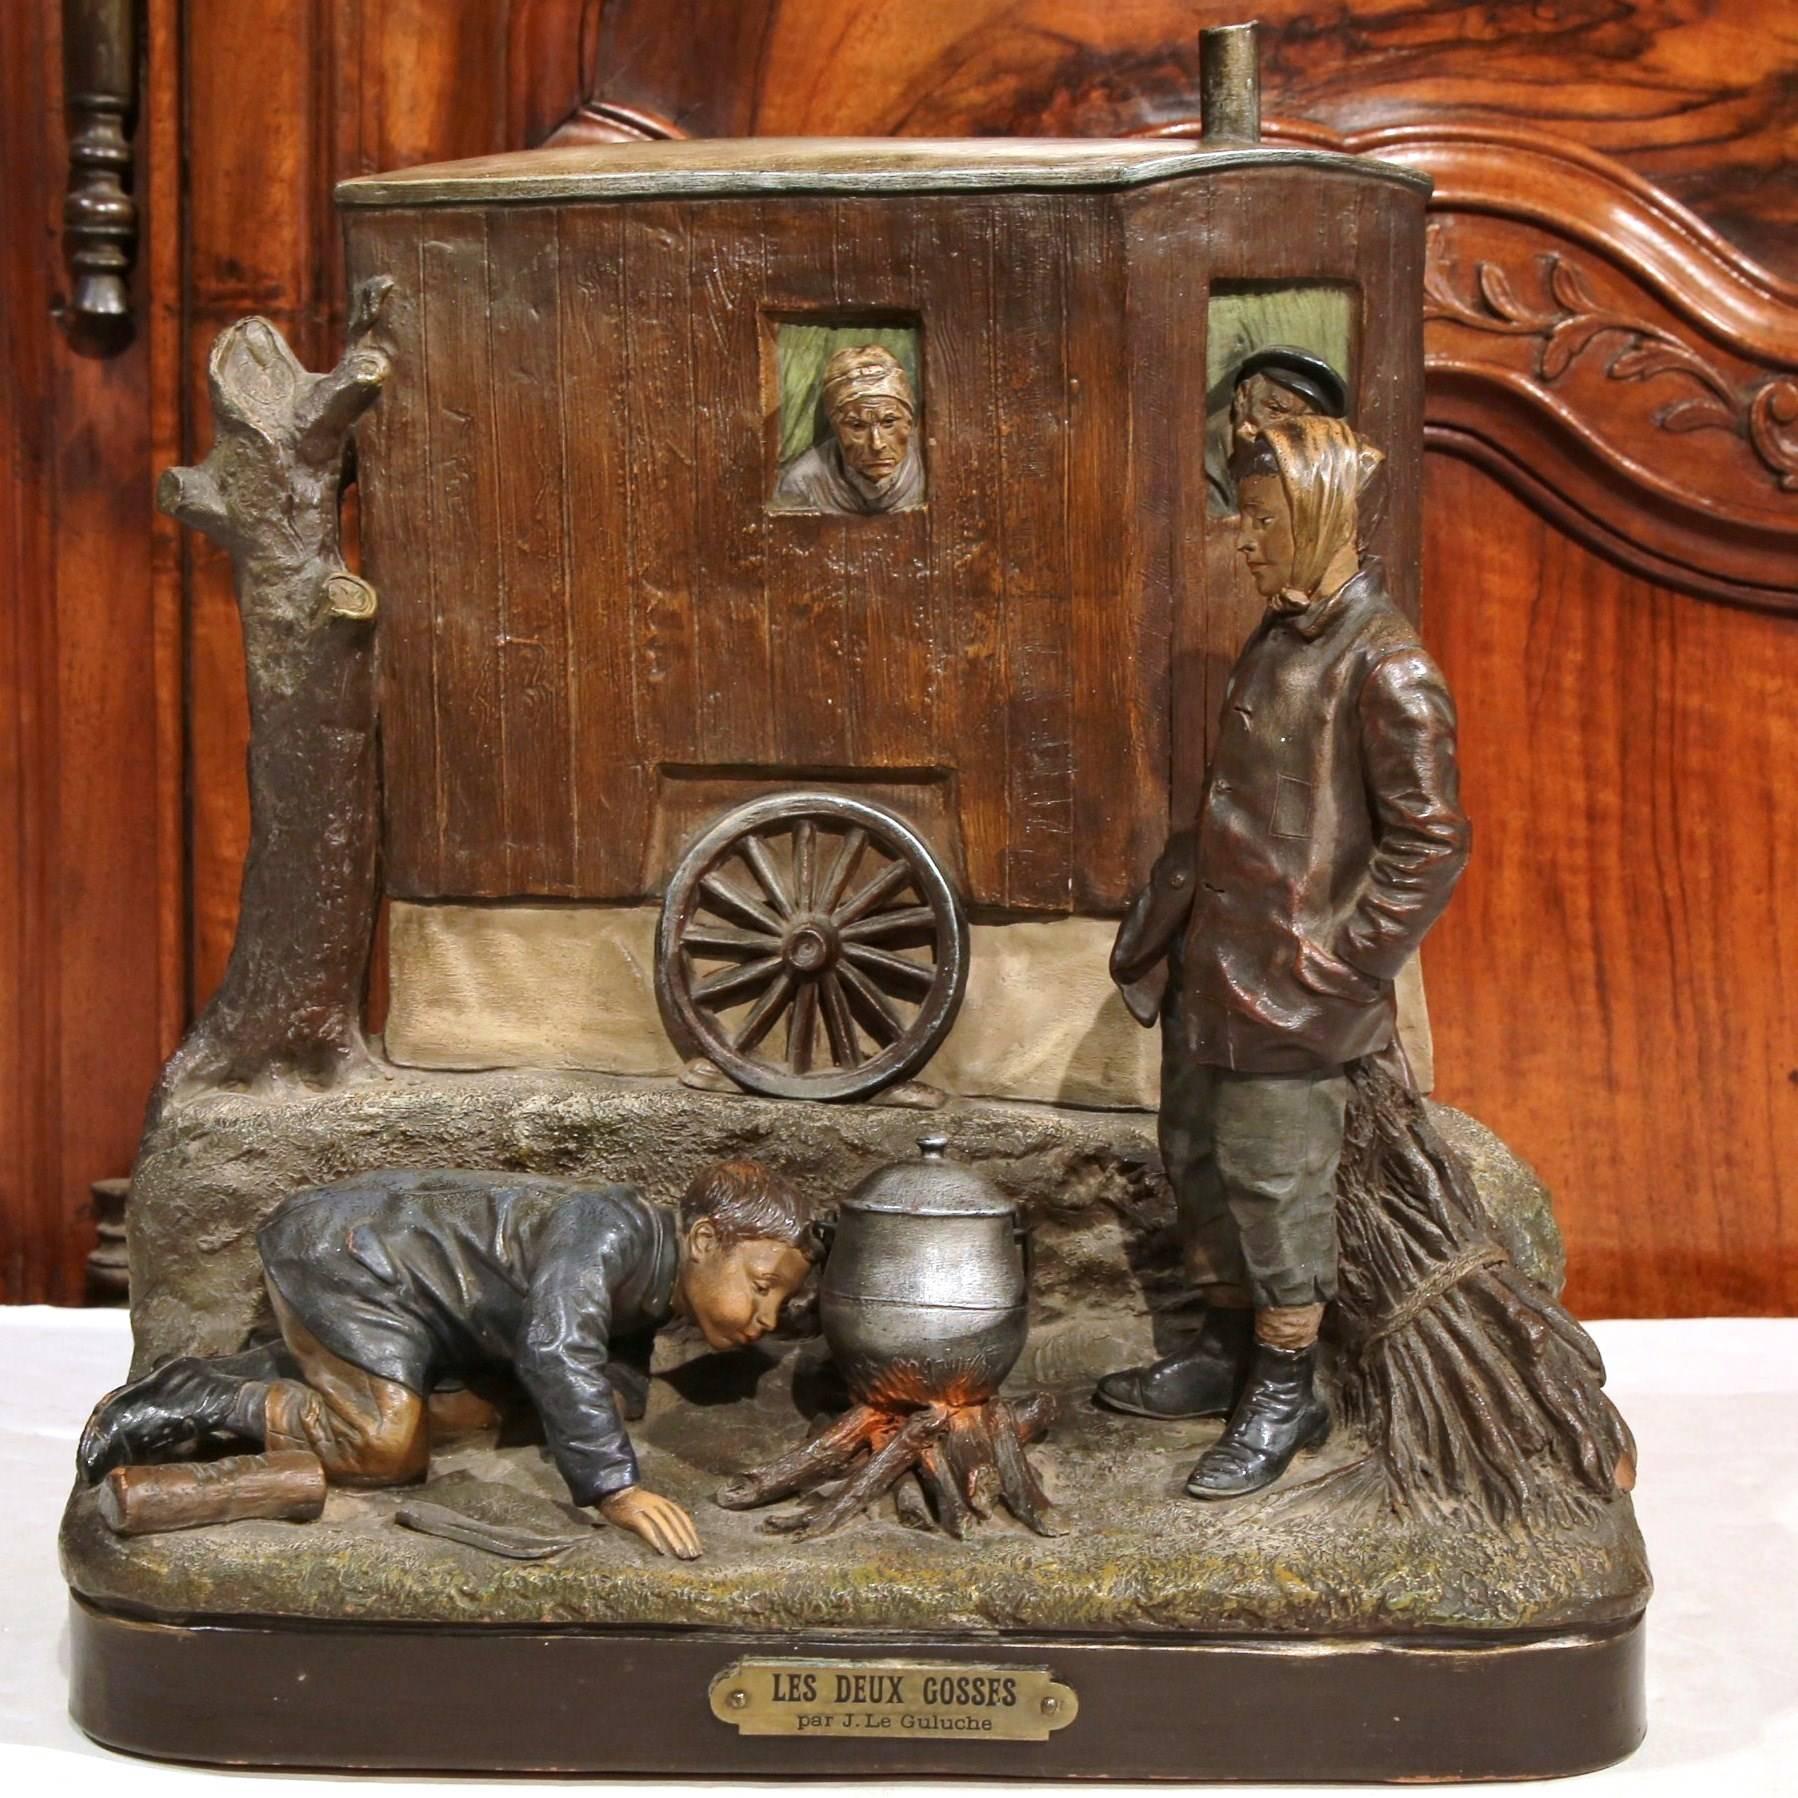 This fine, antique sculpture was crafted in France, circa 1880. Made of terracotta, and titled 